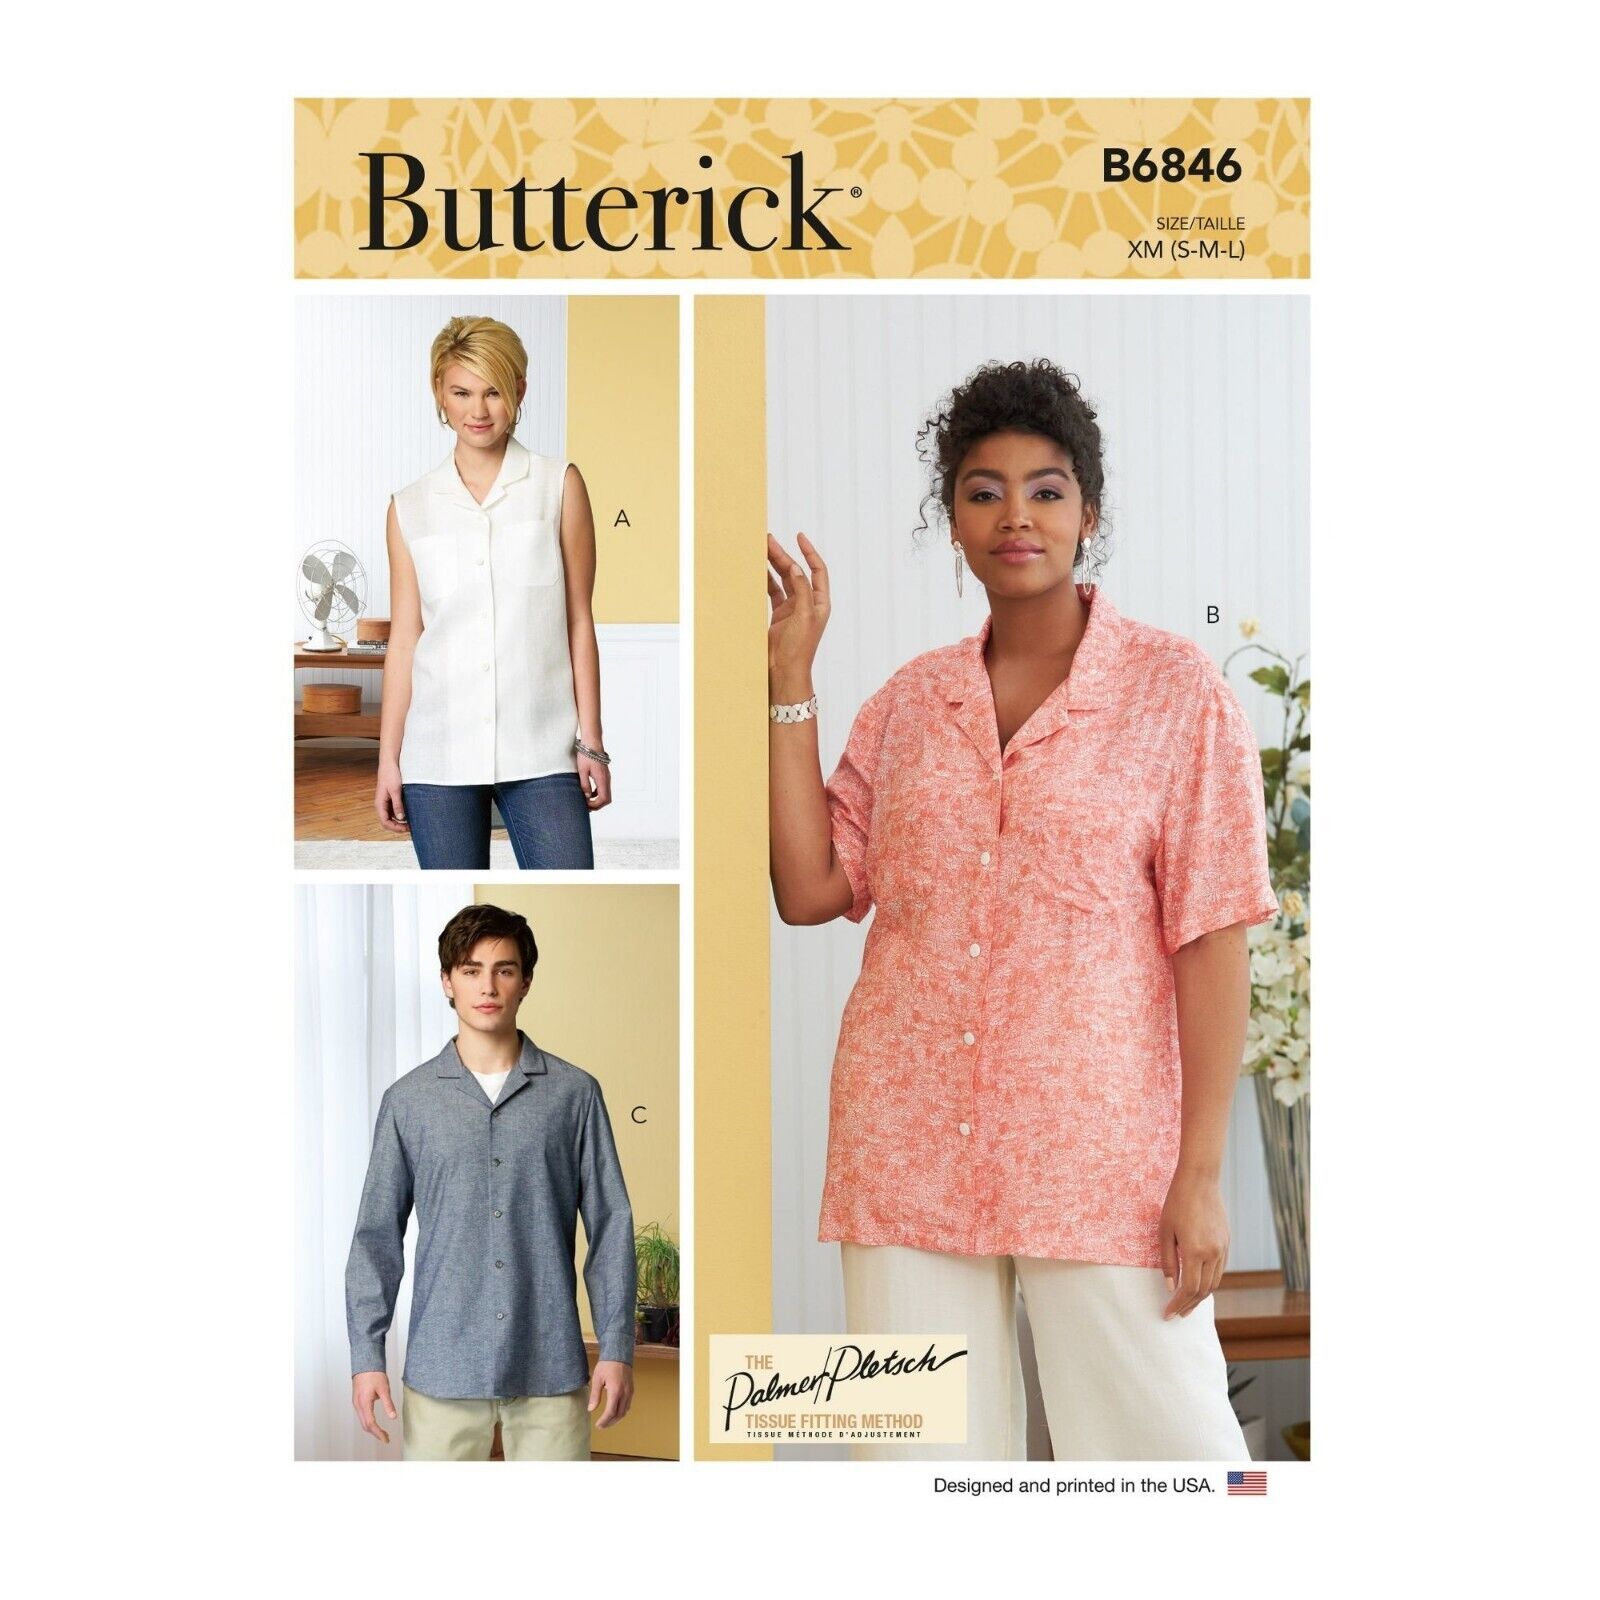 Butterick Sewing Pattern B6846 R11071 Shirt Top Button Front Unisex Size S-L - $8.99